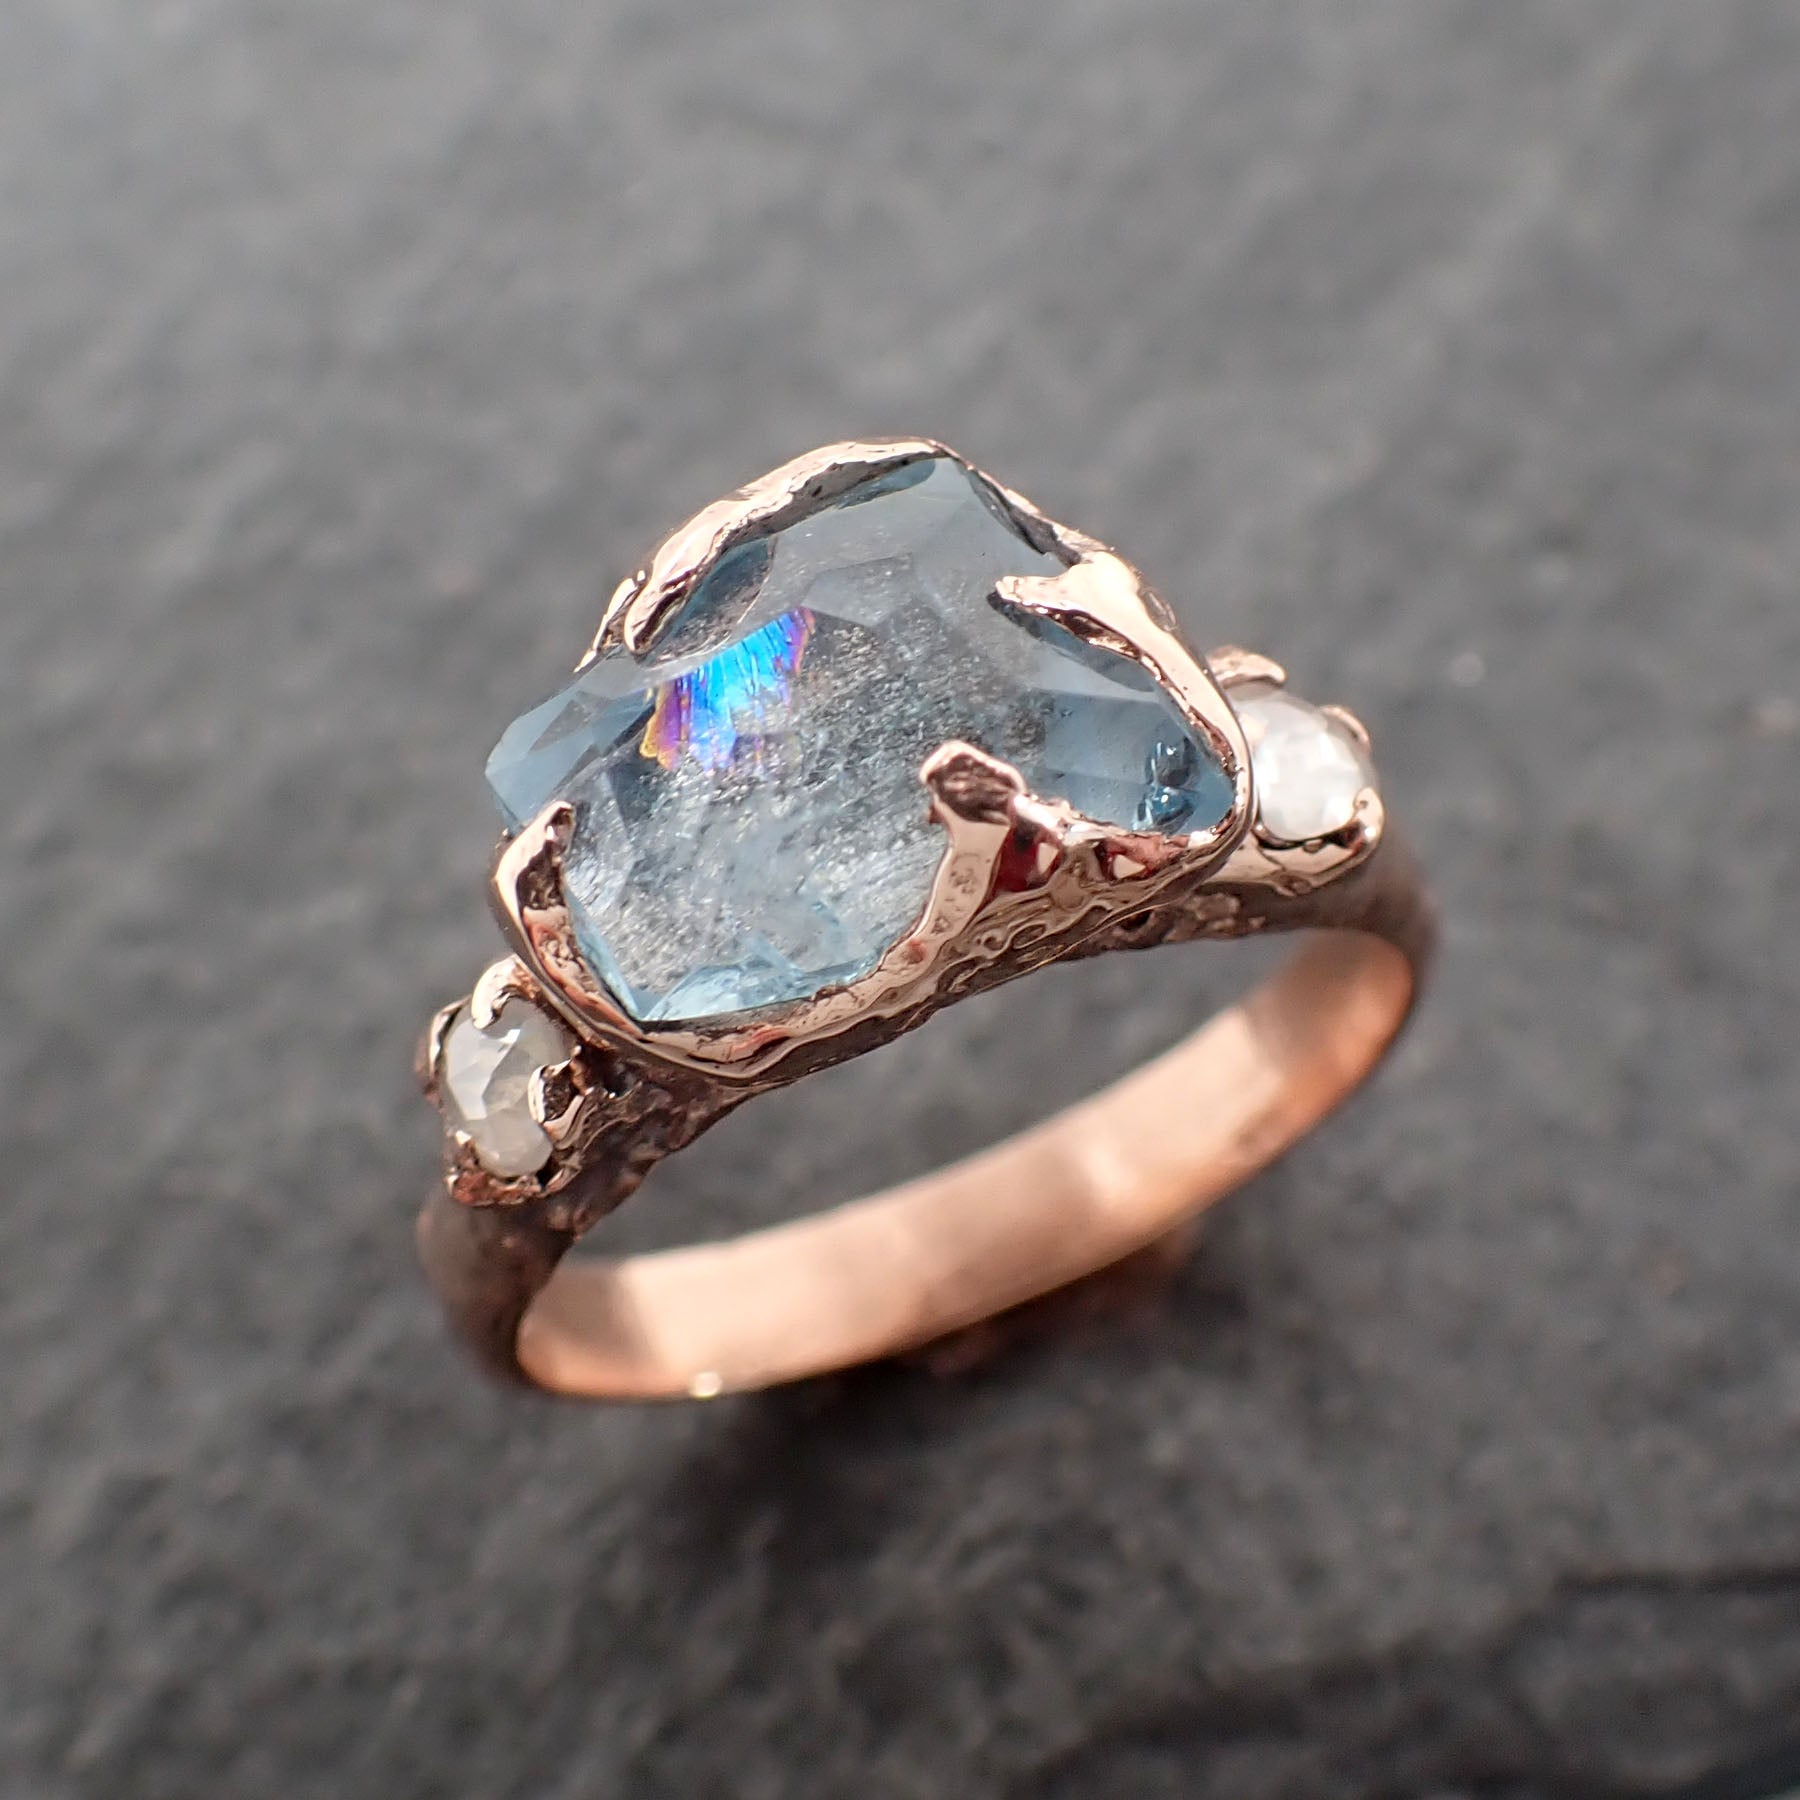 Partially Faceted Aquamarine and Diamond 14k rose Gold Multi stone Ring OOAK Gemstone Ring Recycled gold 2532